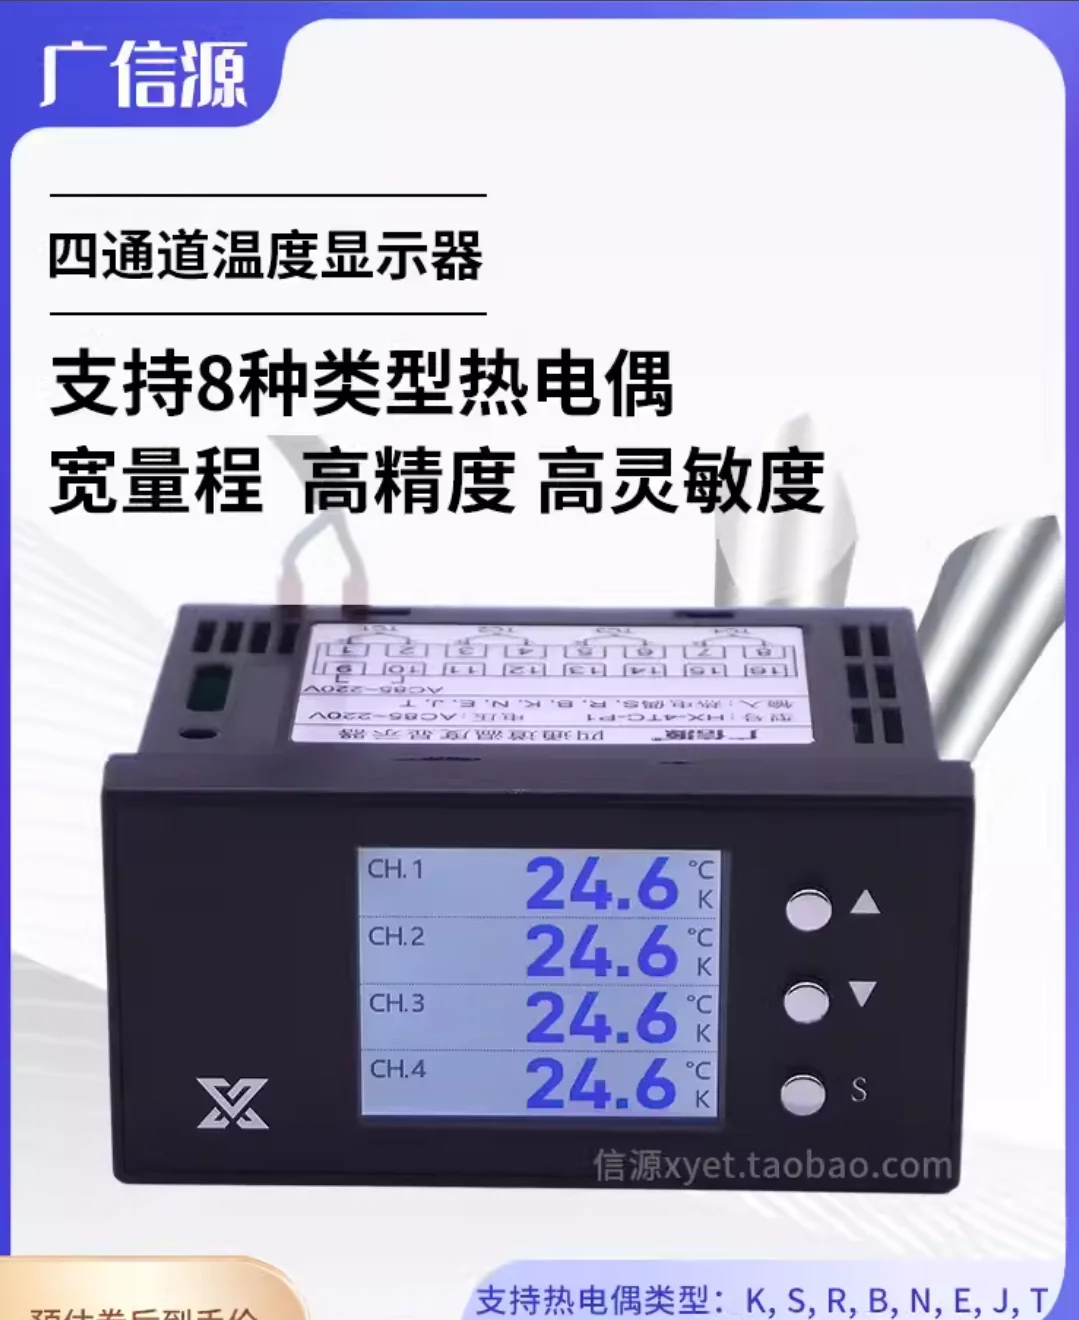 

Multi Channel Temperature Display Thermometer 4-loop Industrial Patrol Inspection Instrument K-type Thermocouple Input